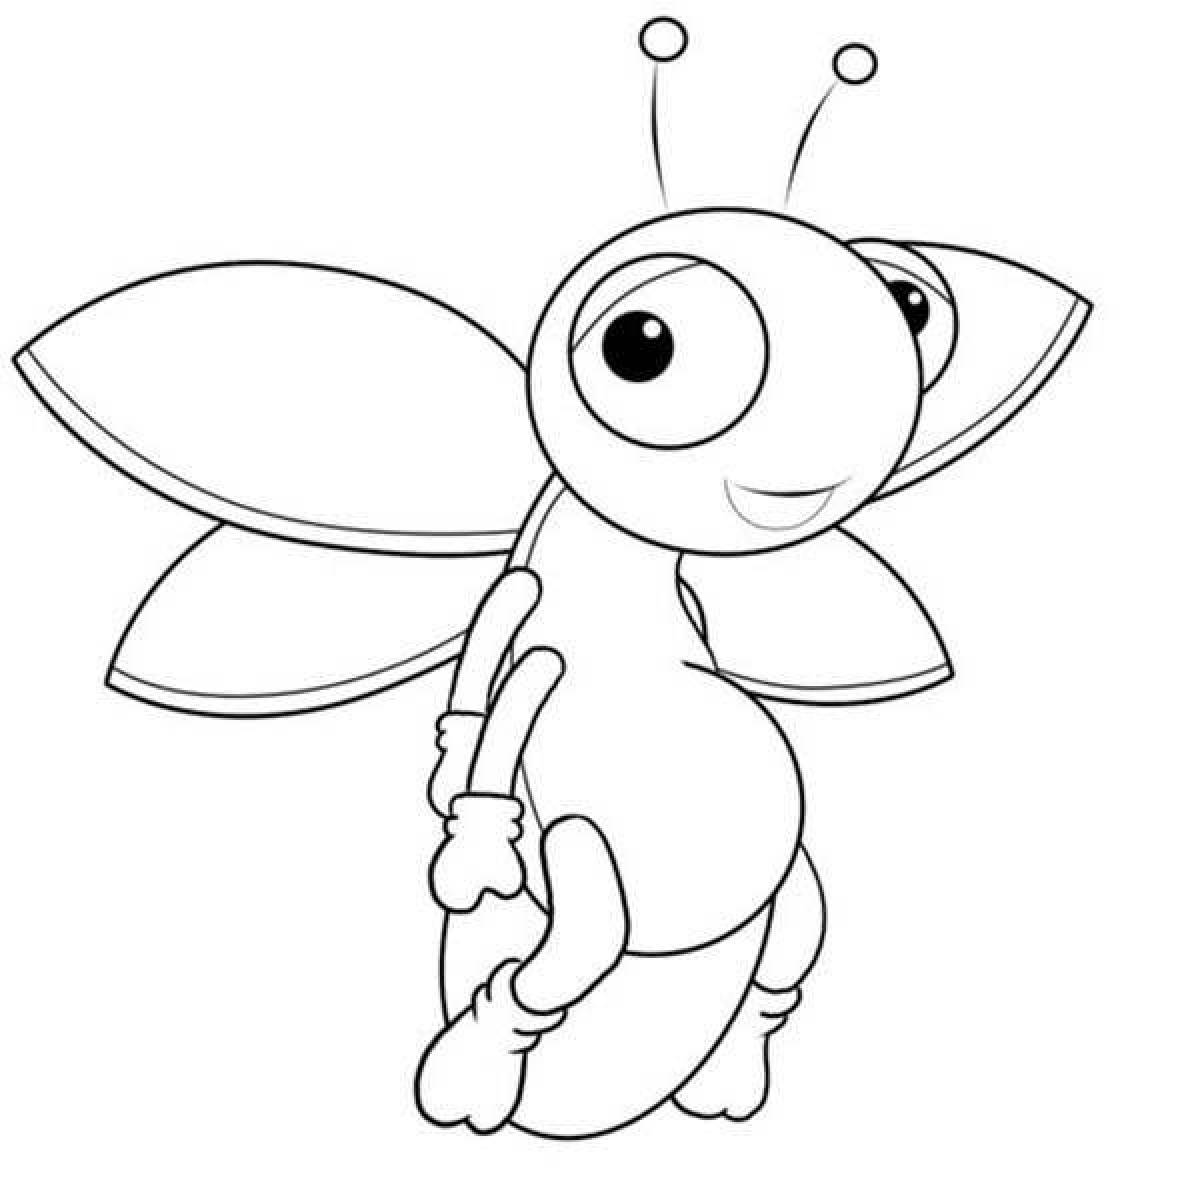 Animated firefly coloring page